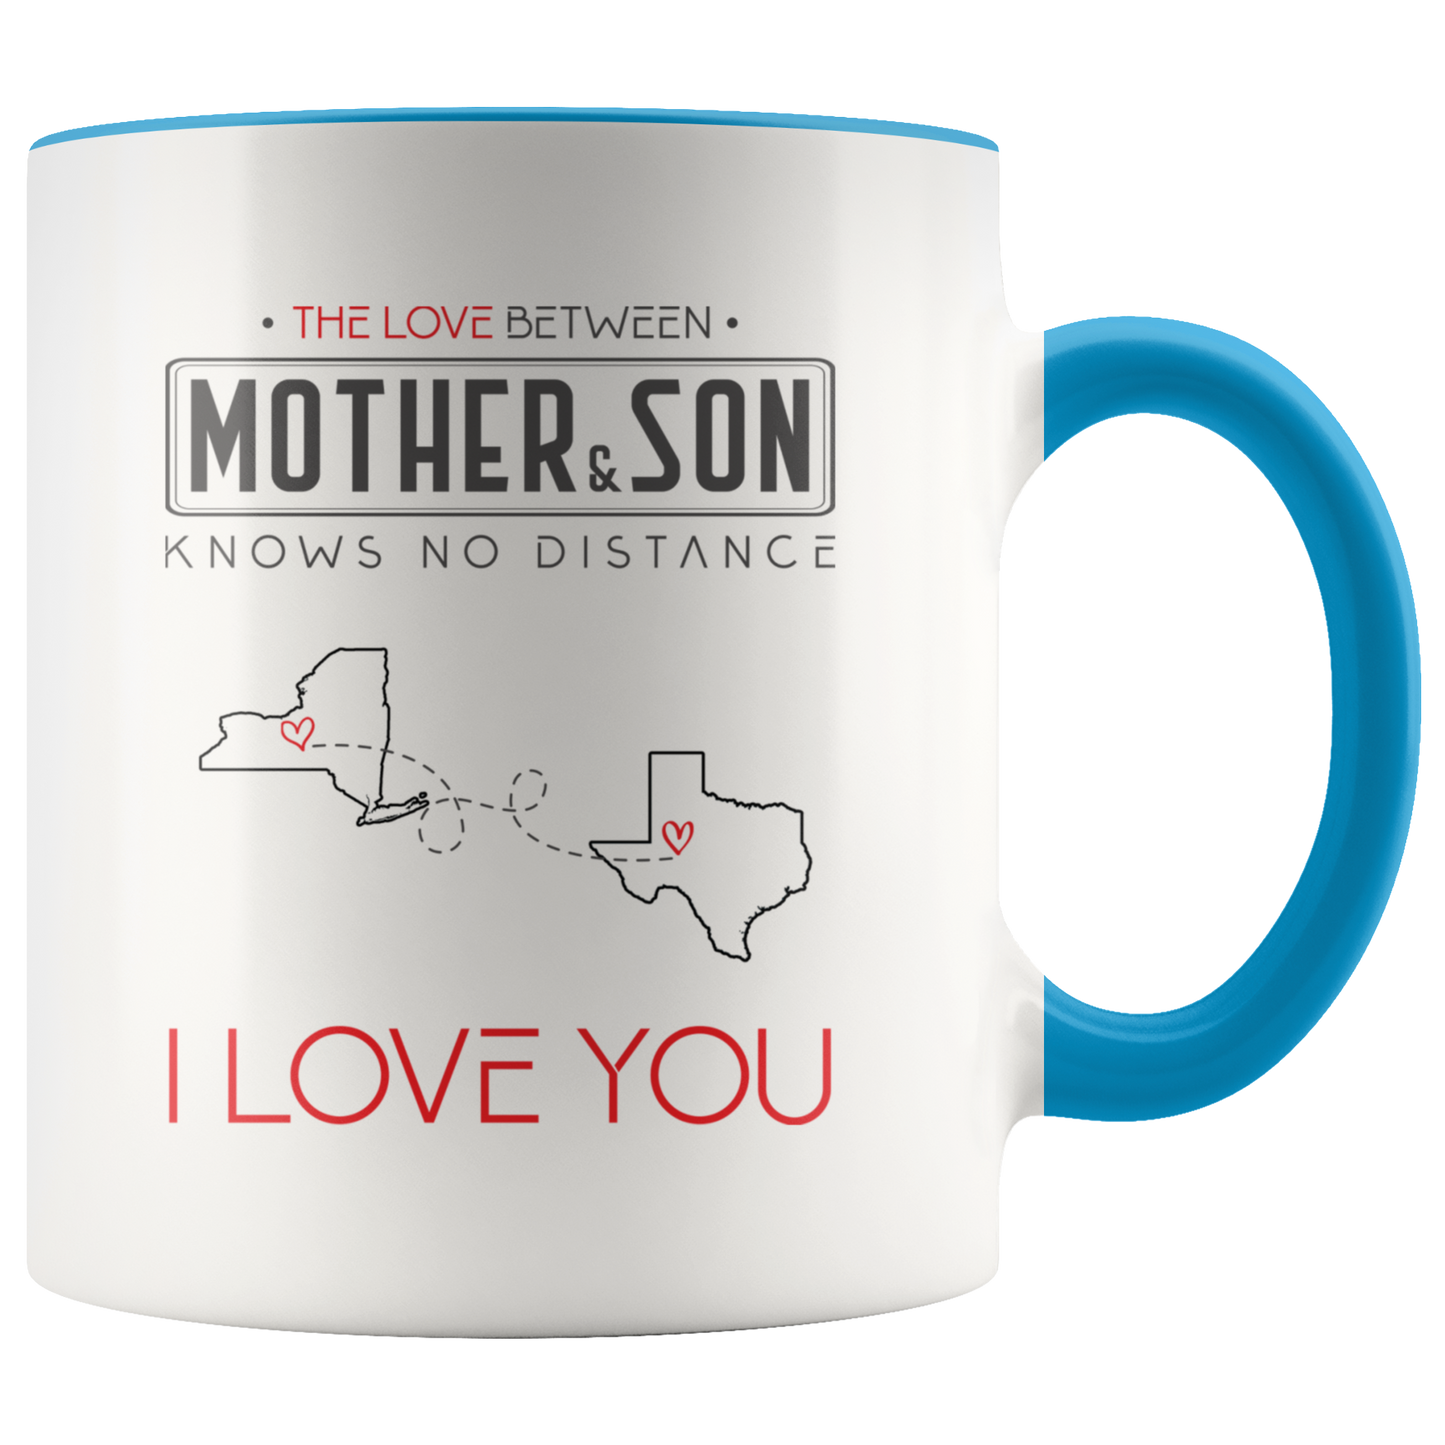 ND-21315233-sp-23550 - [ New York | Texas ]Mom And Son Accent Mug 11 oz Red - The Love Between Mother A